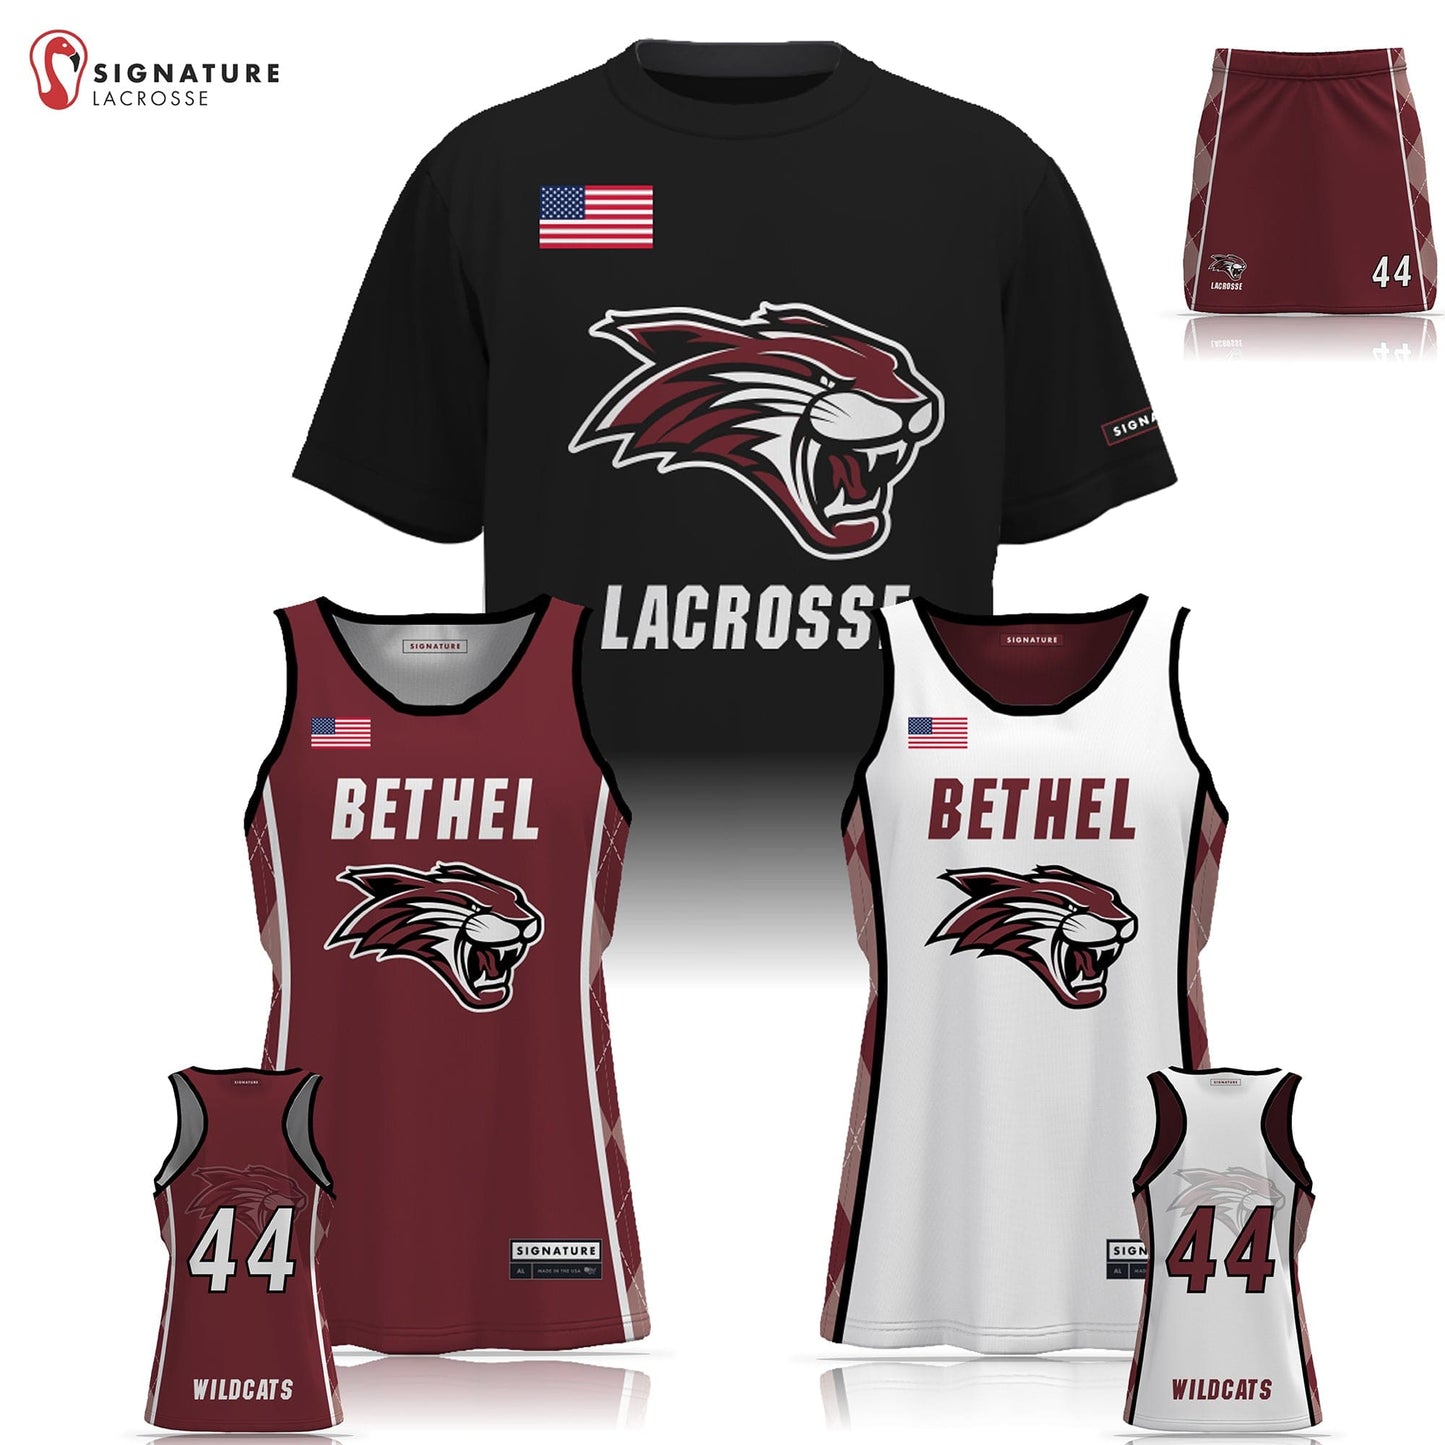 Bethel Youth Lacrosse Women's 3 Piece Game Package - Basic 2.0 - S/S Shooter Shirt:Girls Junior Signature Lacrosse